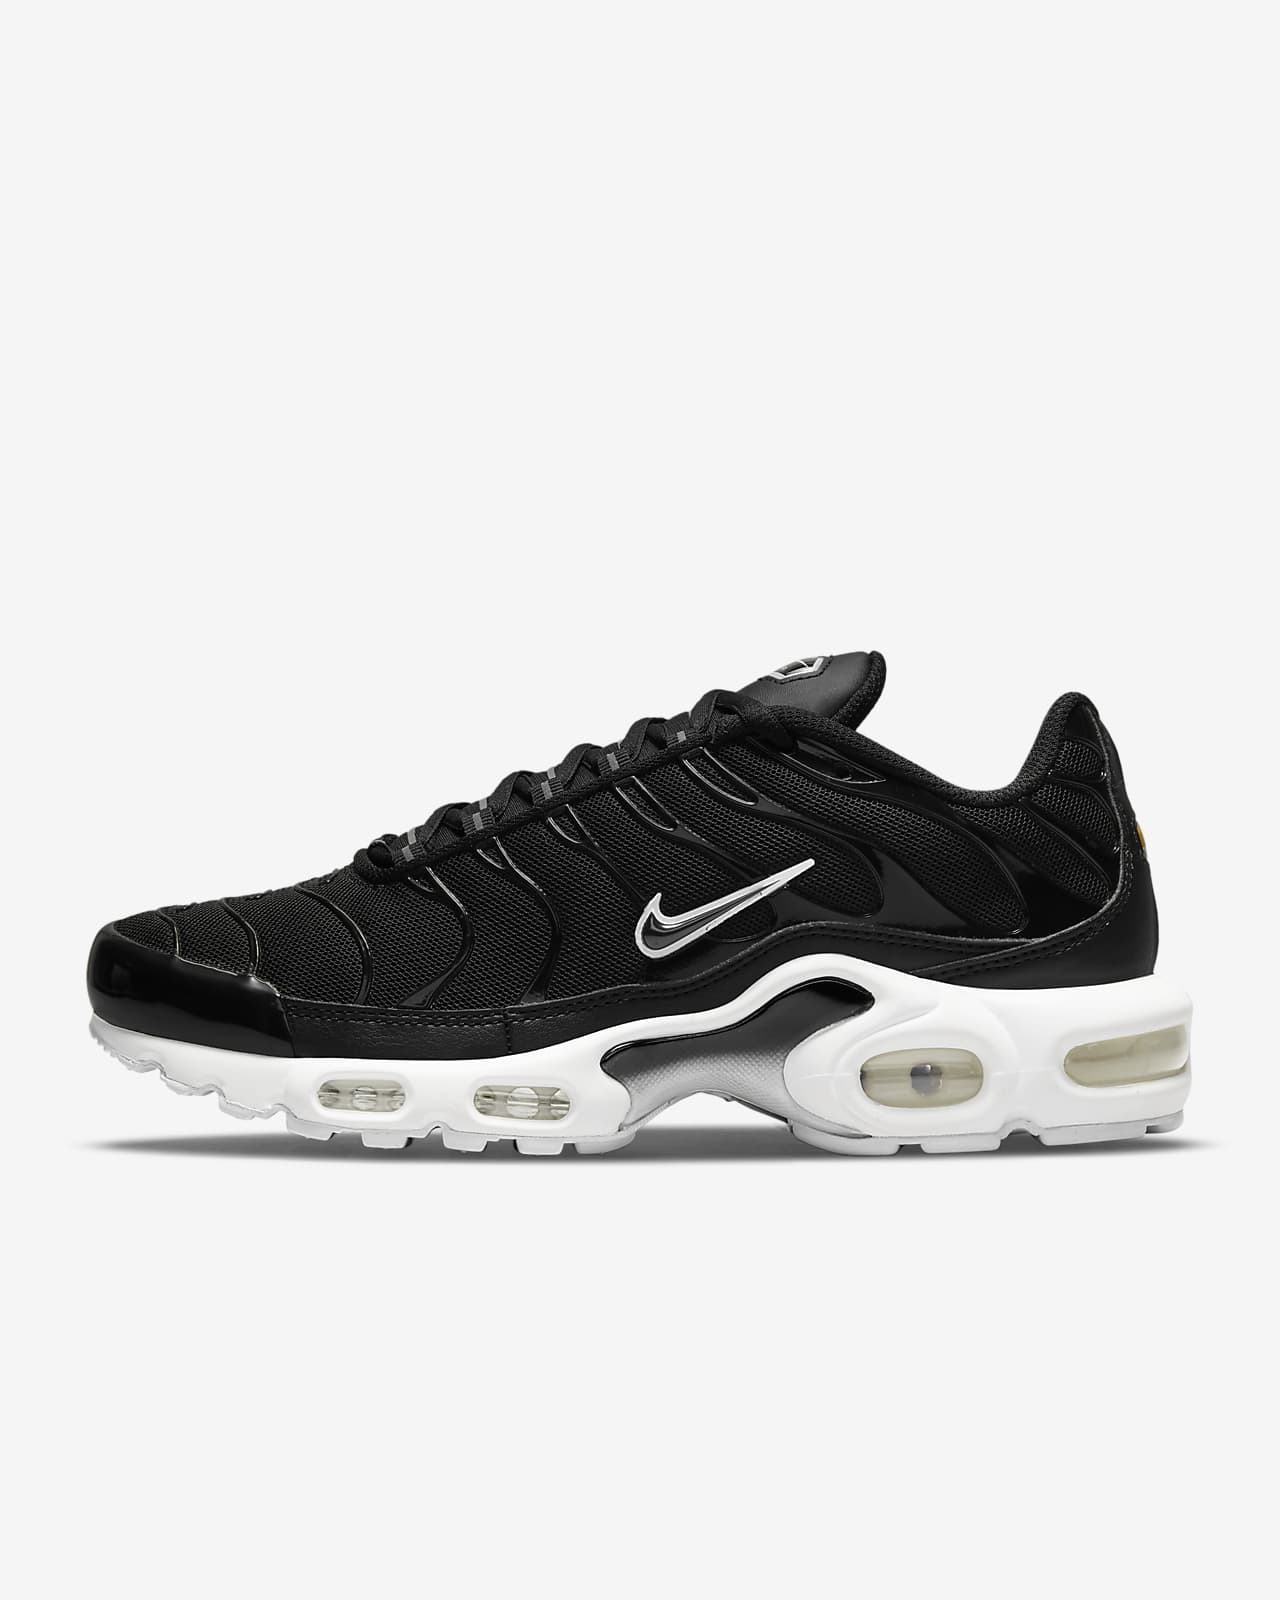 Andes cafetería Desalentar Nike Air Max Plus Women's Shoes. Nike LU